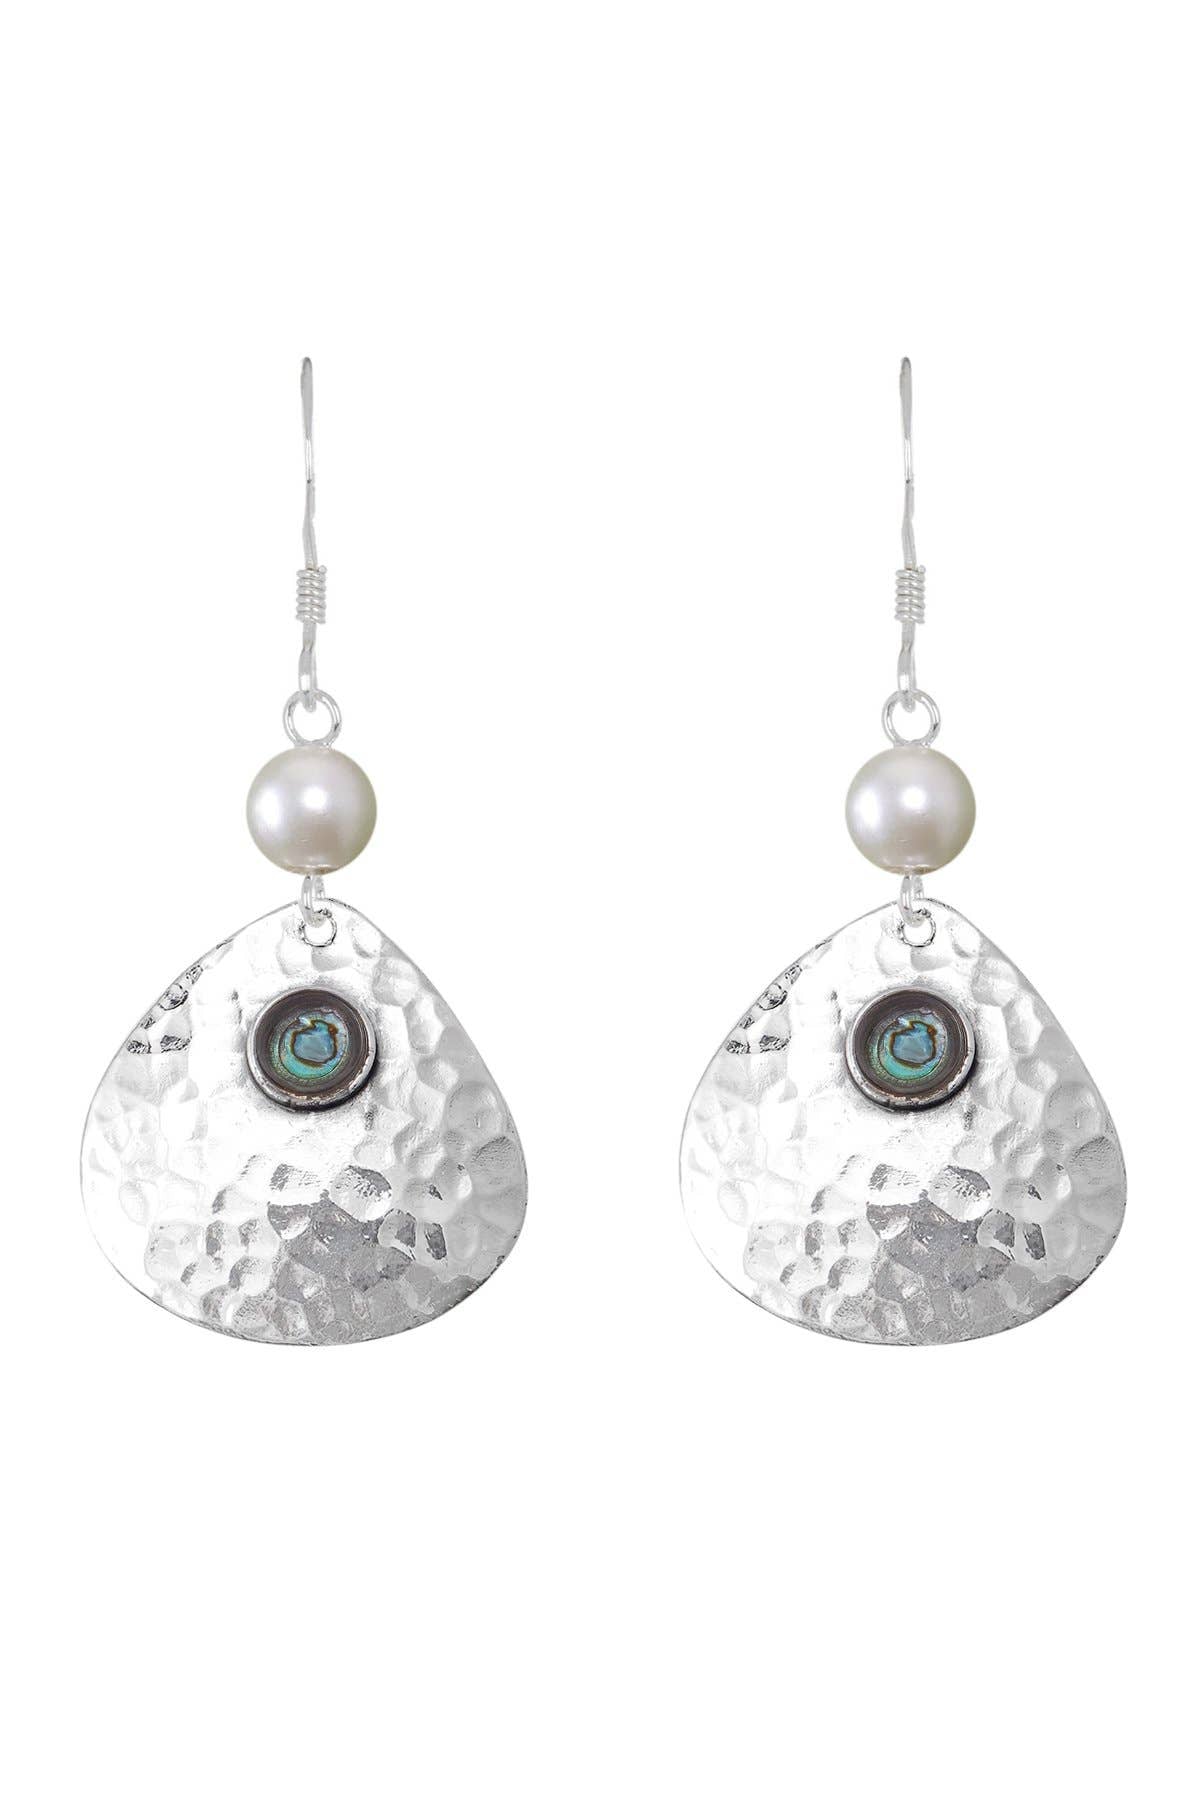 Abalone Hammered Drop Earrings - SS